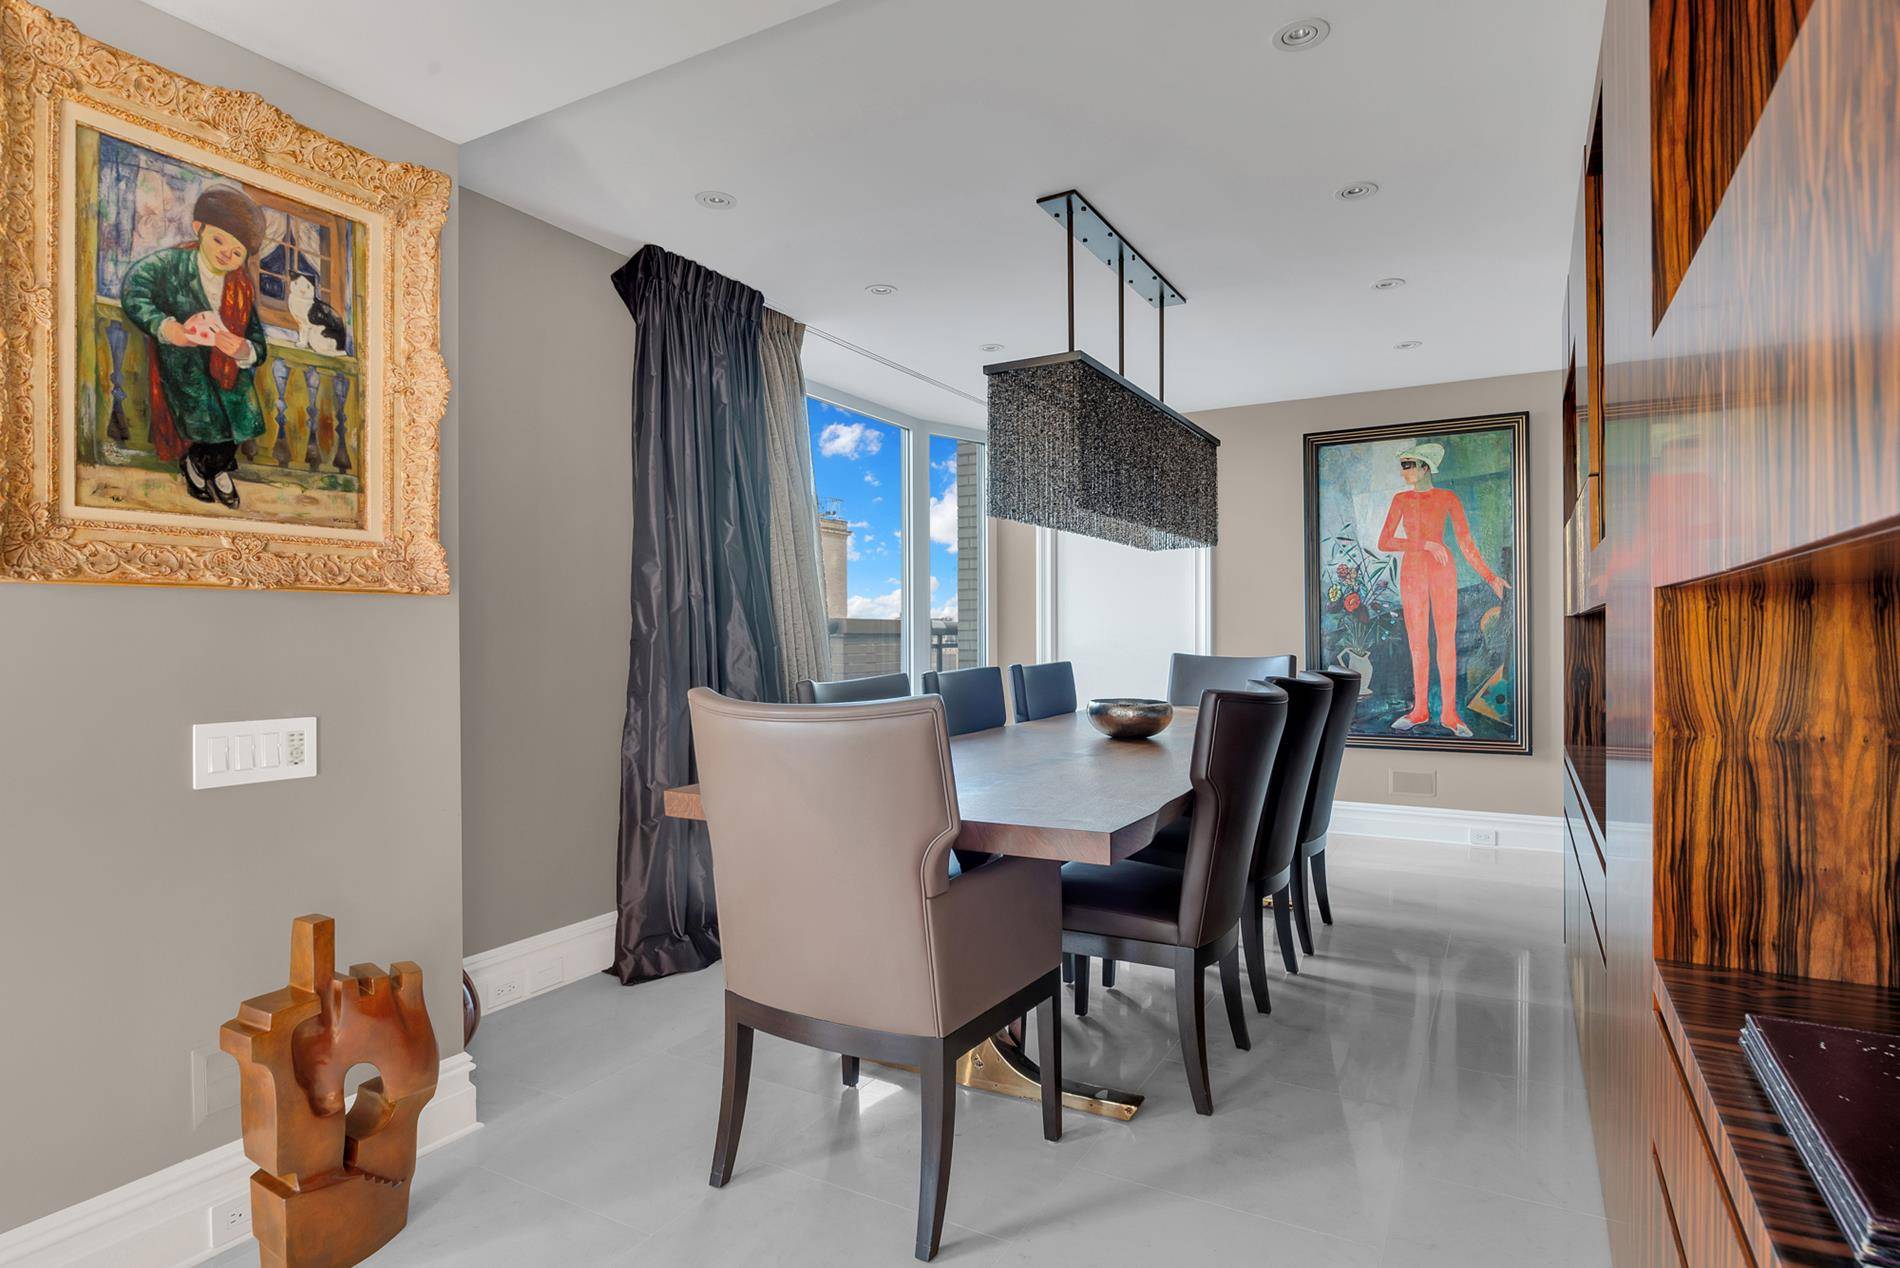 Extraordinary in every detail, penthouse 2B is a luxurious 5, 700 sf.